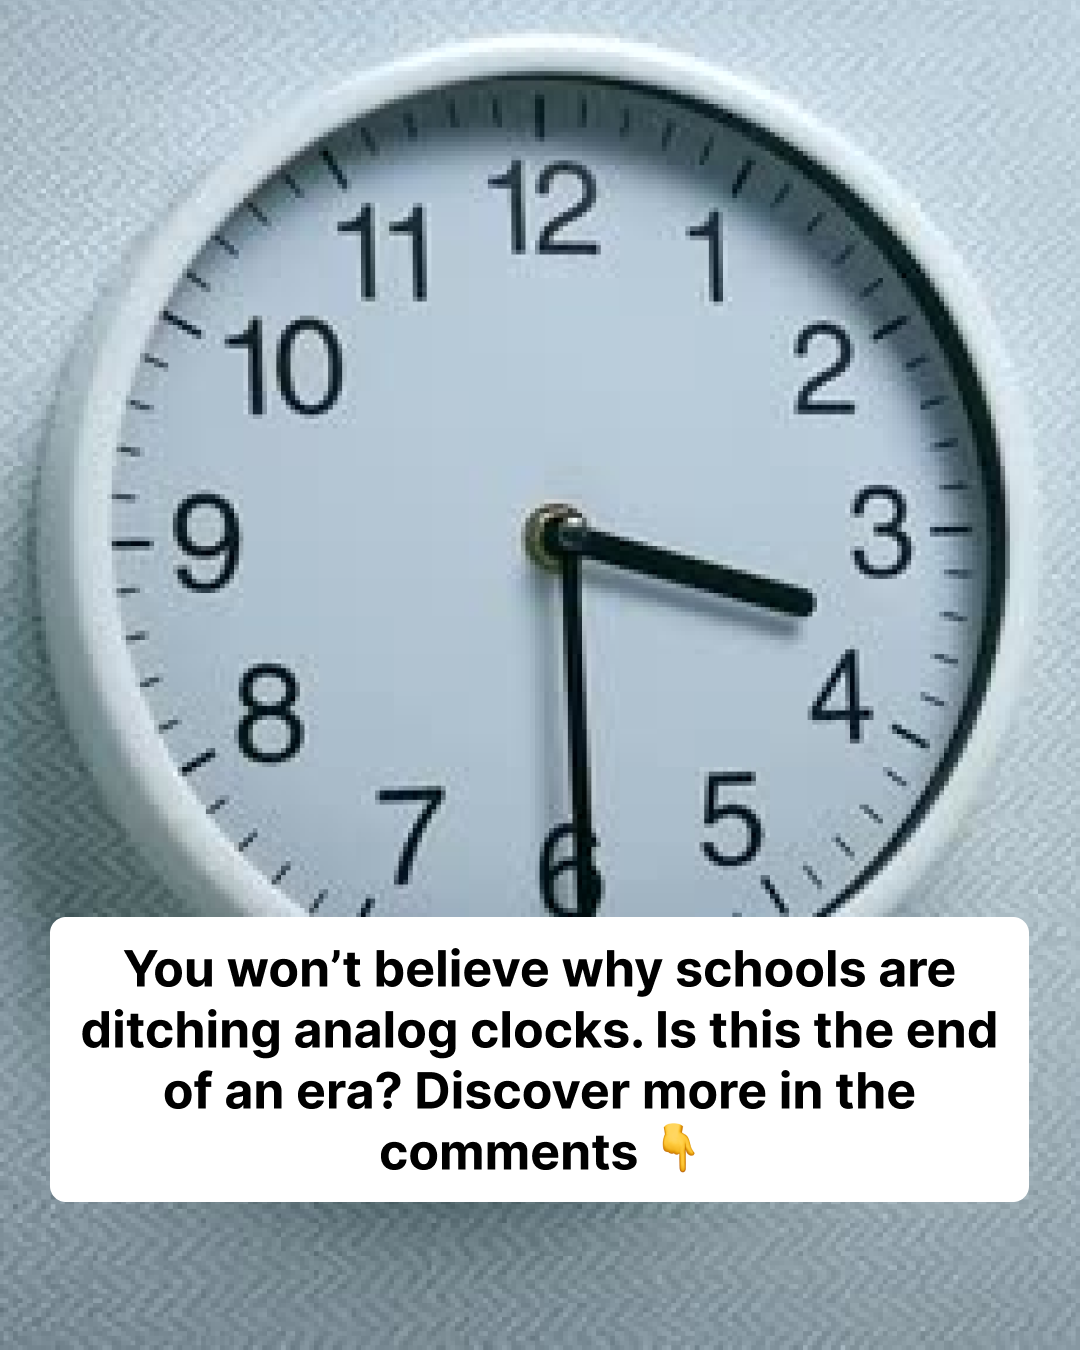 Schools Are Taking Down Analog Clocks Because Students Can’t Read Them